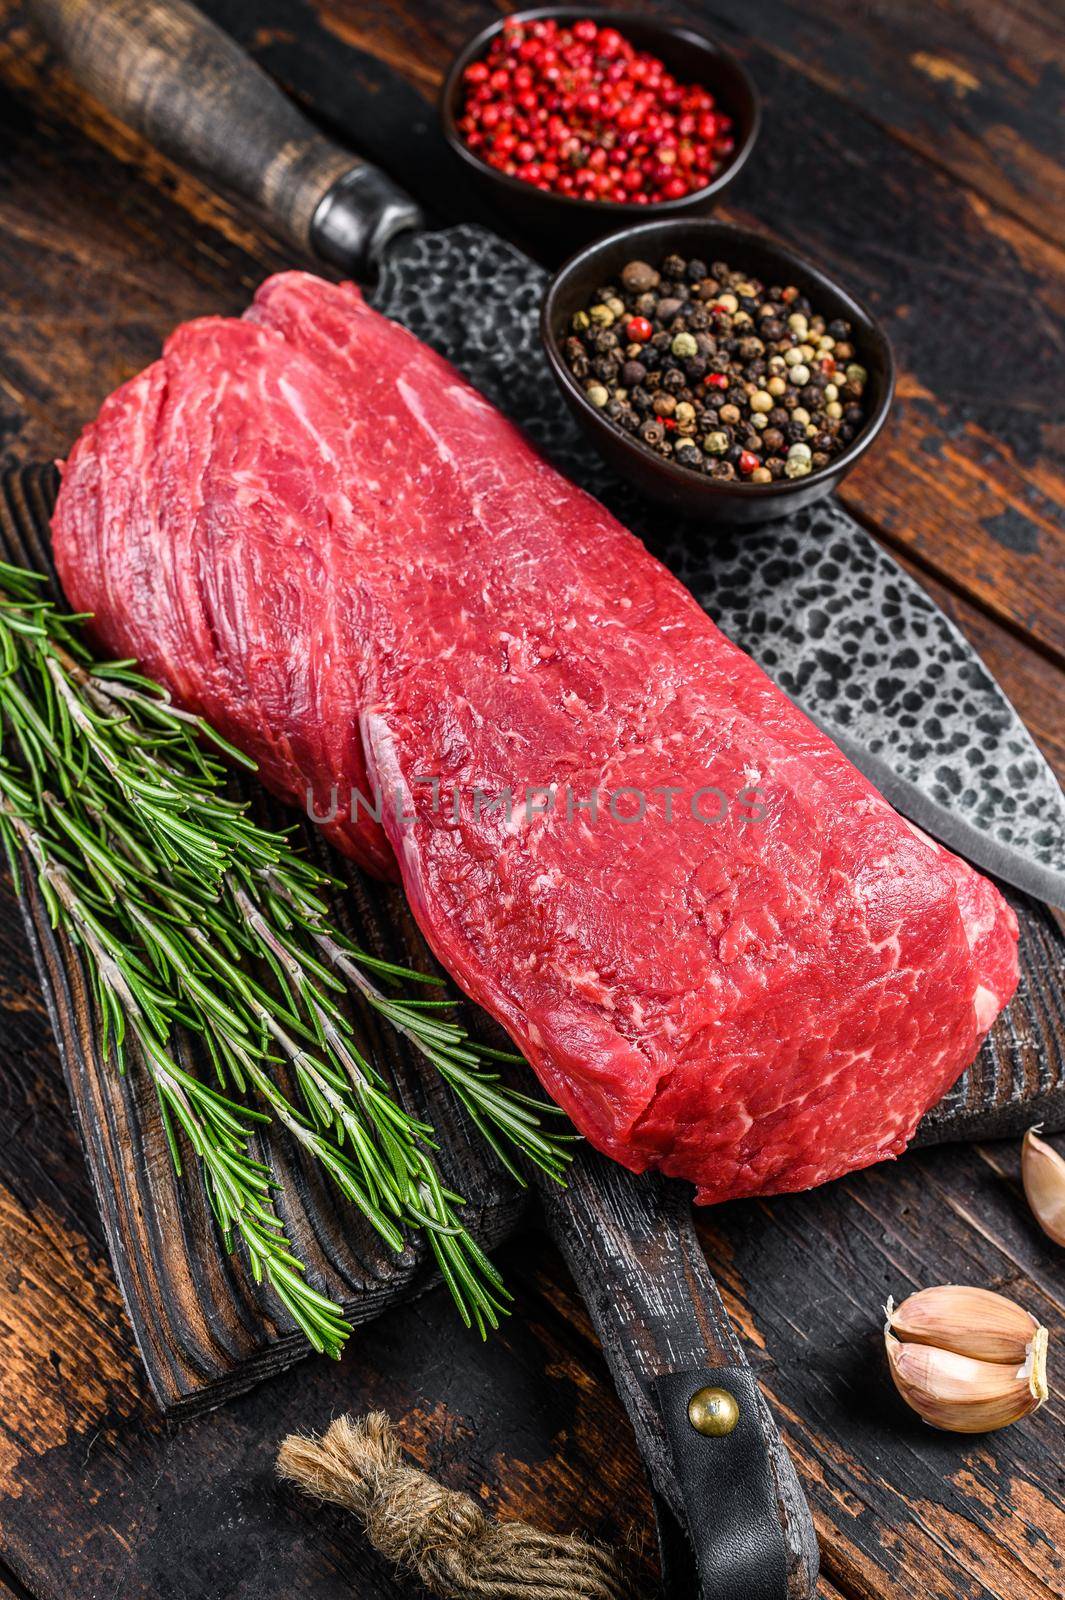 Whole Raw Tenderloin beef meat for steaks fillet mignon on a wooden cutting board with butcher knife. Dark wooden background. Top view by Composter